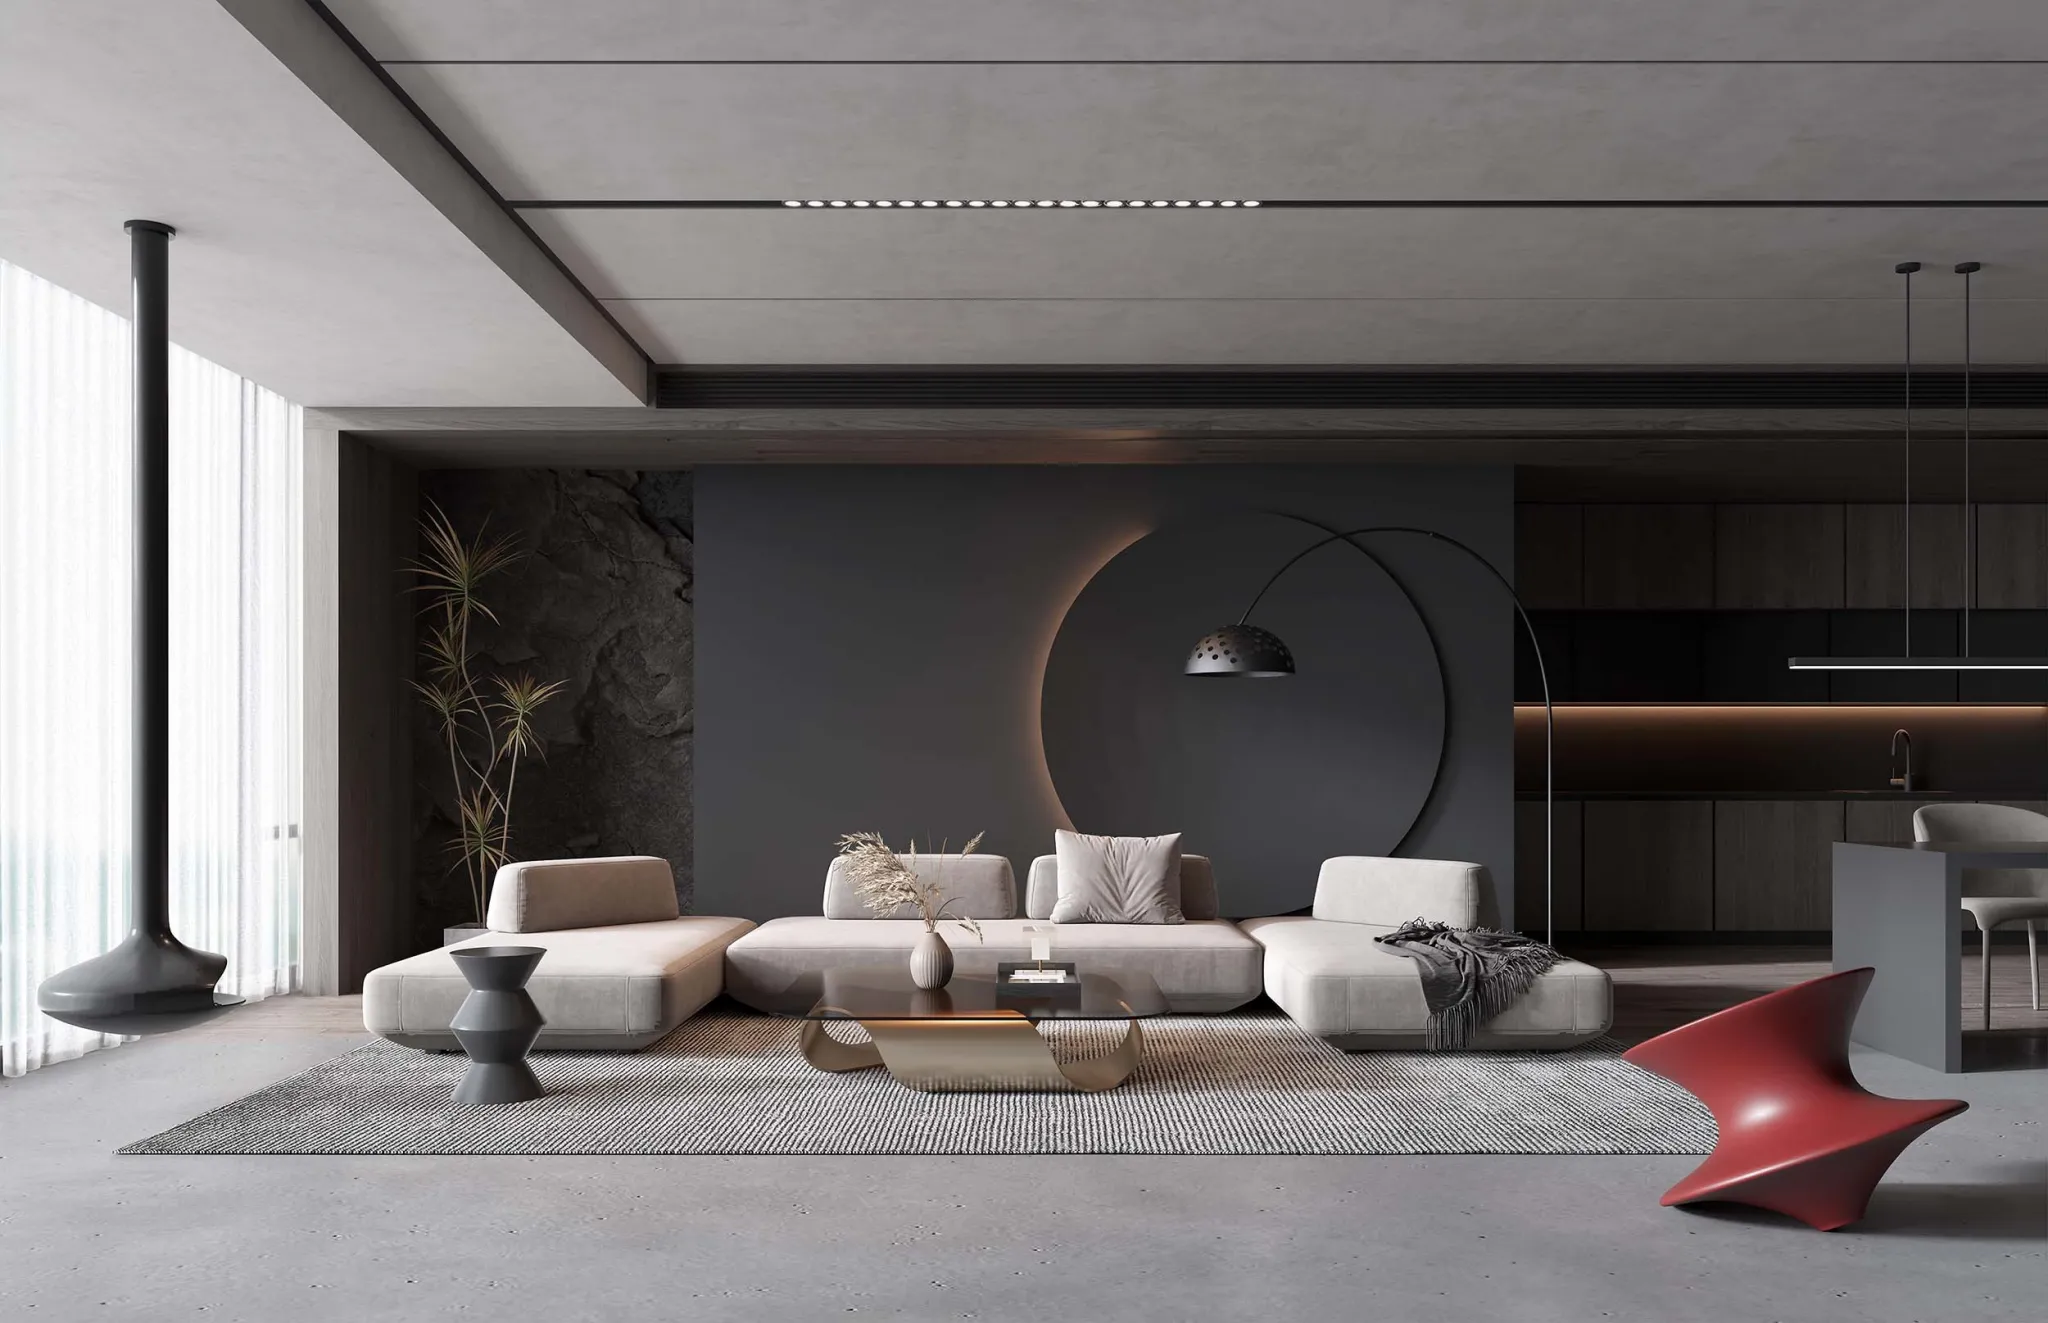 HOUSE SPACE 3D SCENES – LIVING ROOM – 0121